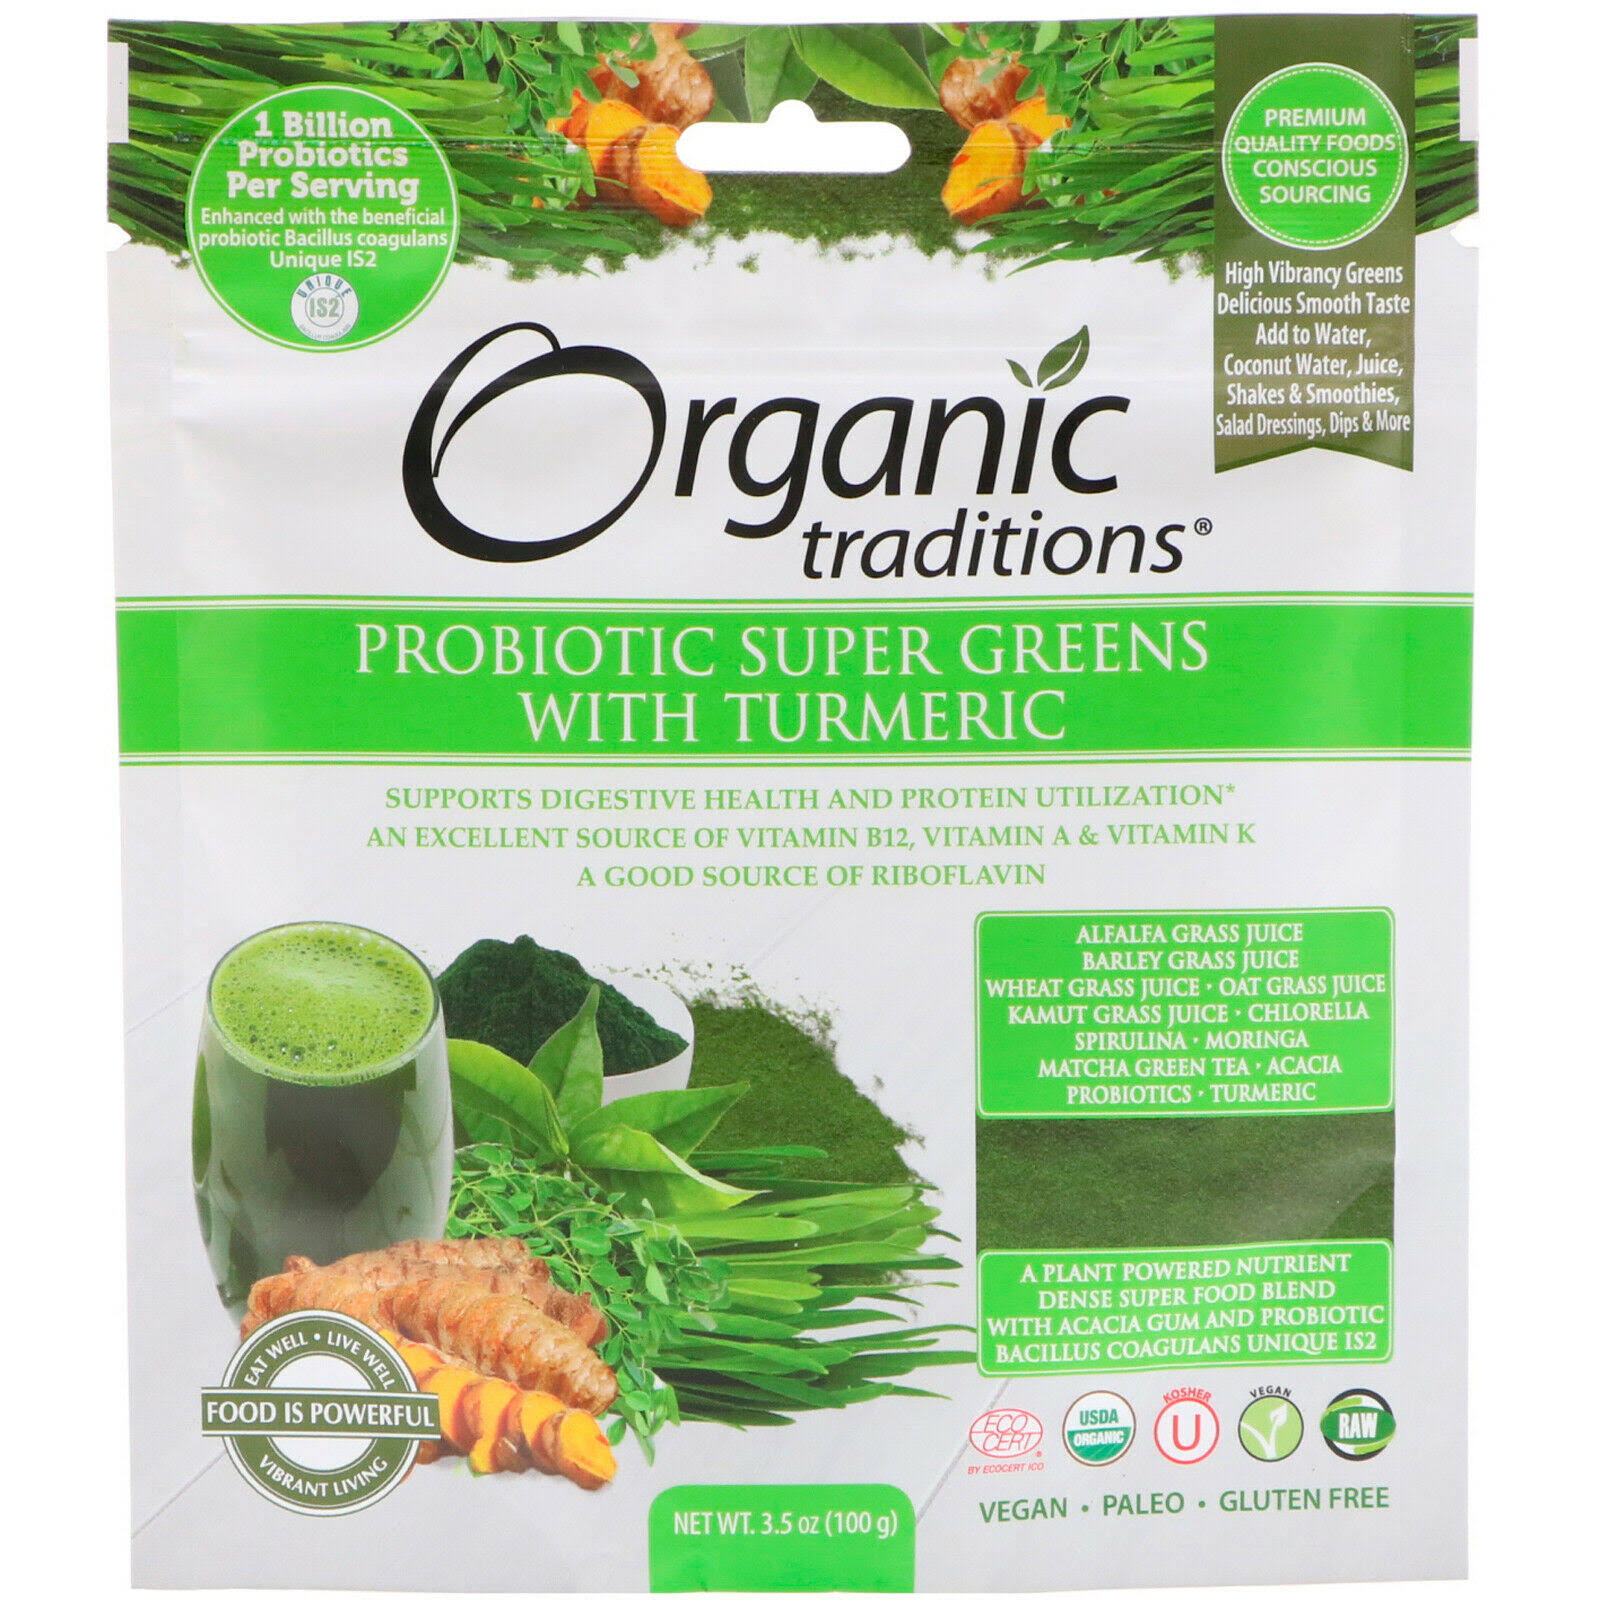 Organic Traditions Probiotic Super Greens with Turmeric - 3.5oz